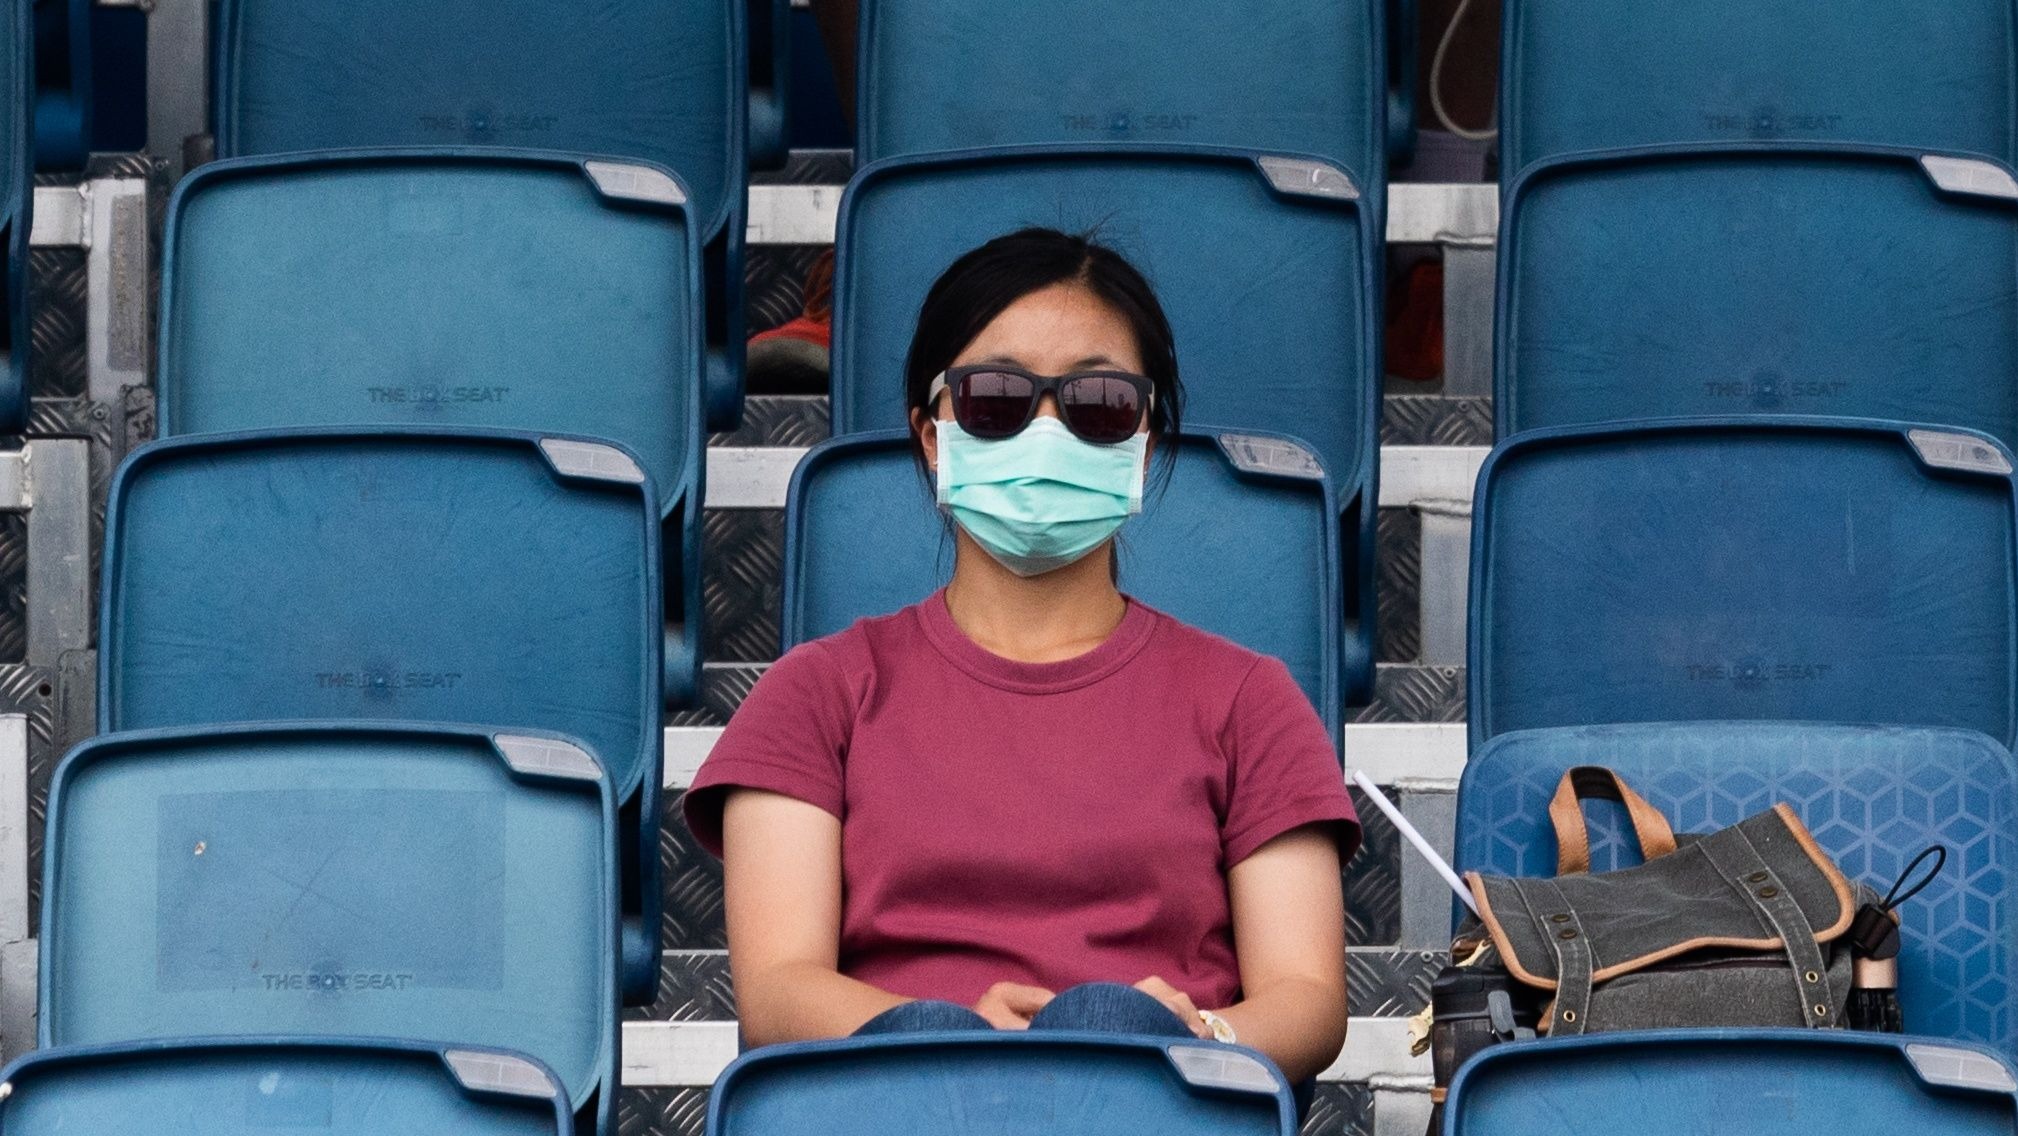 A spectator at the Australian Open, which has been affected by smoke from bushfires